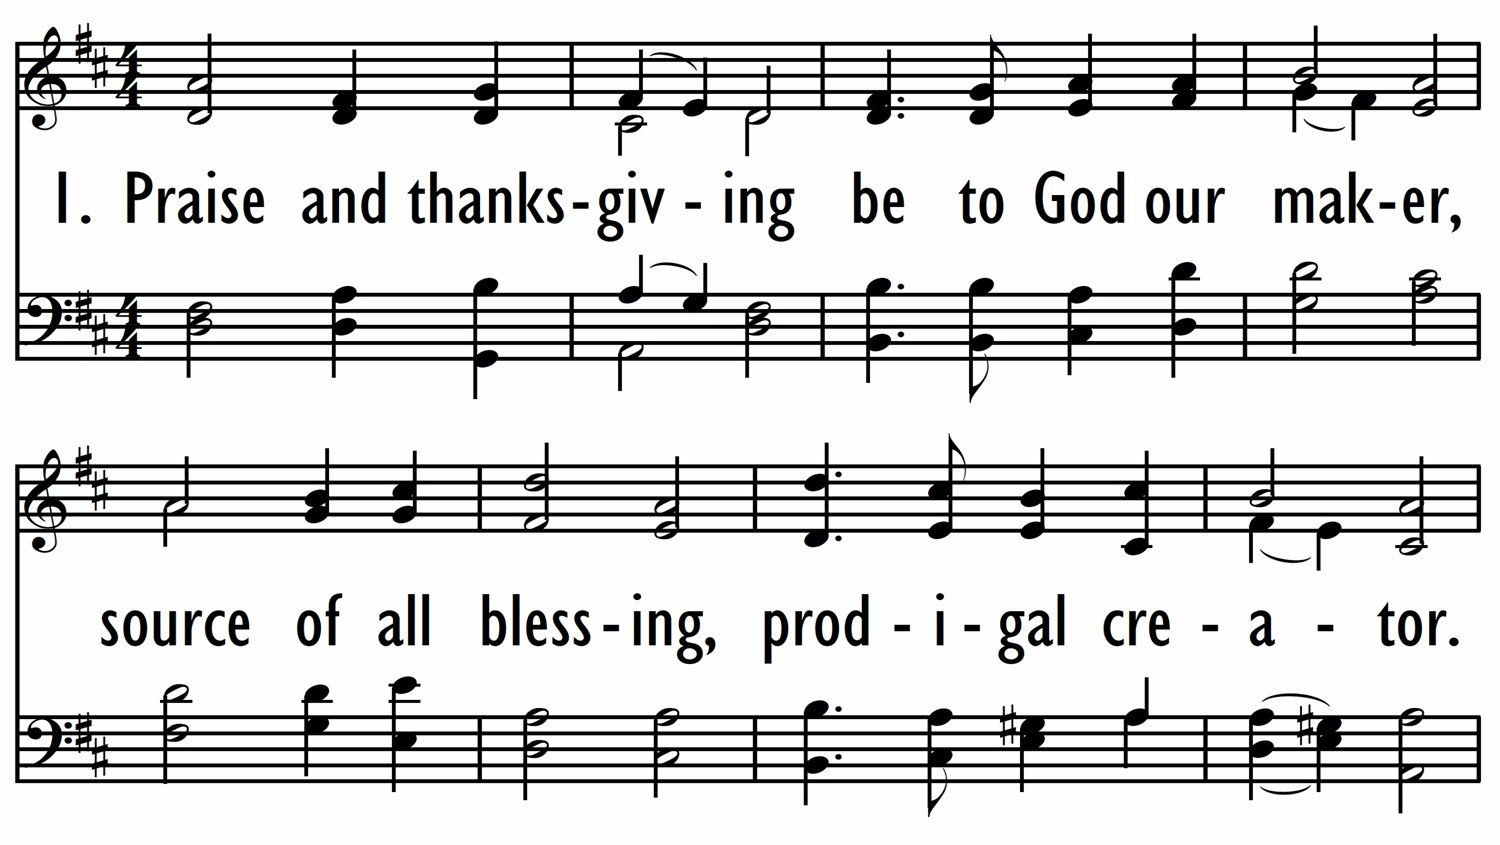 PRAISE AND THANKSGIVING BE TO GOD-ppt